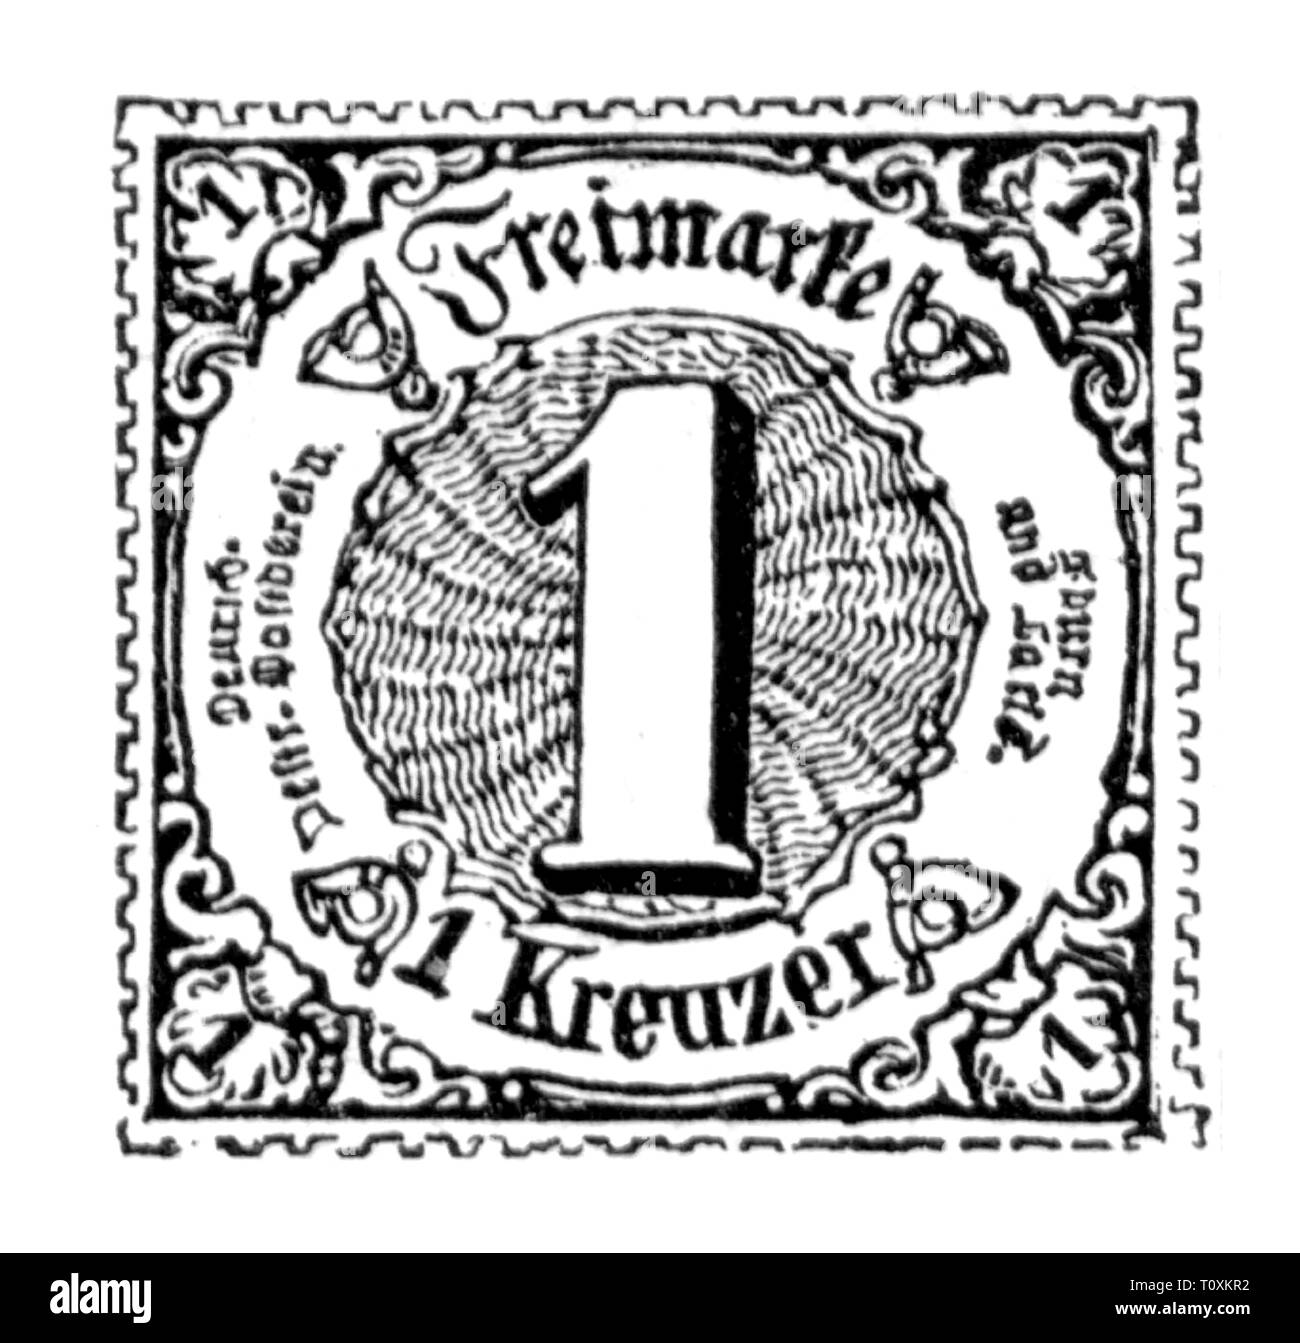 La poste, timbres, Allemagne, Thurn-und-Taxis-Post, 1 kreuzer timbre-poste, district du Sud, 1865, Additional-Rights Clearance-Info-Not-Available- Banque D'Images